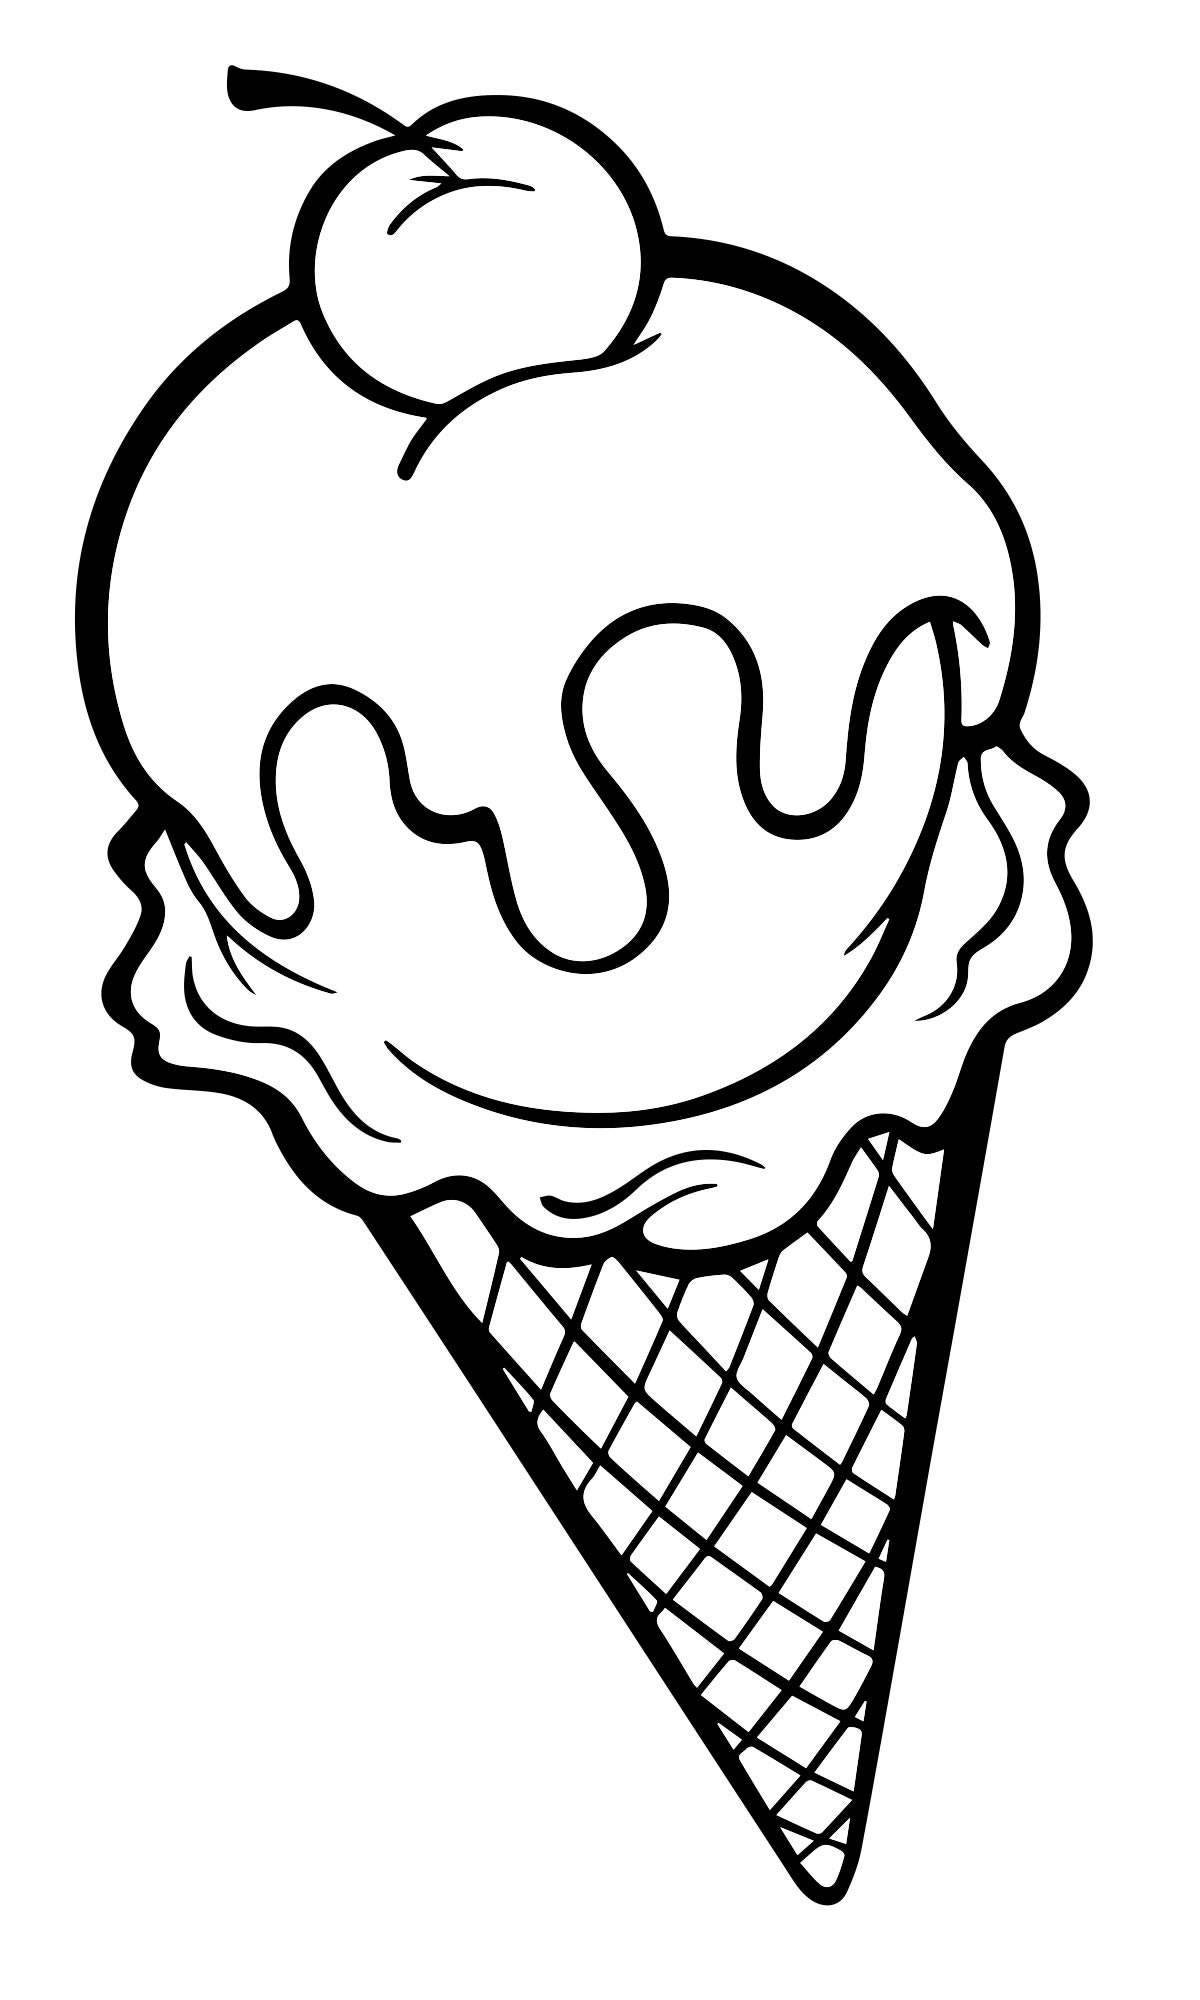 Magic ice cream coloring page for kids